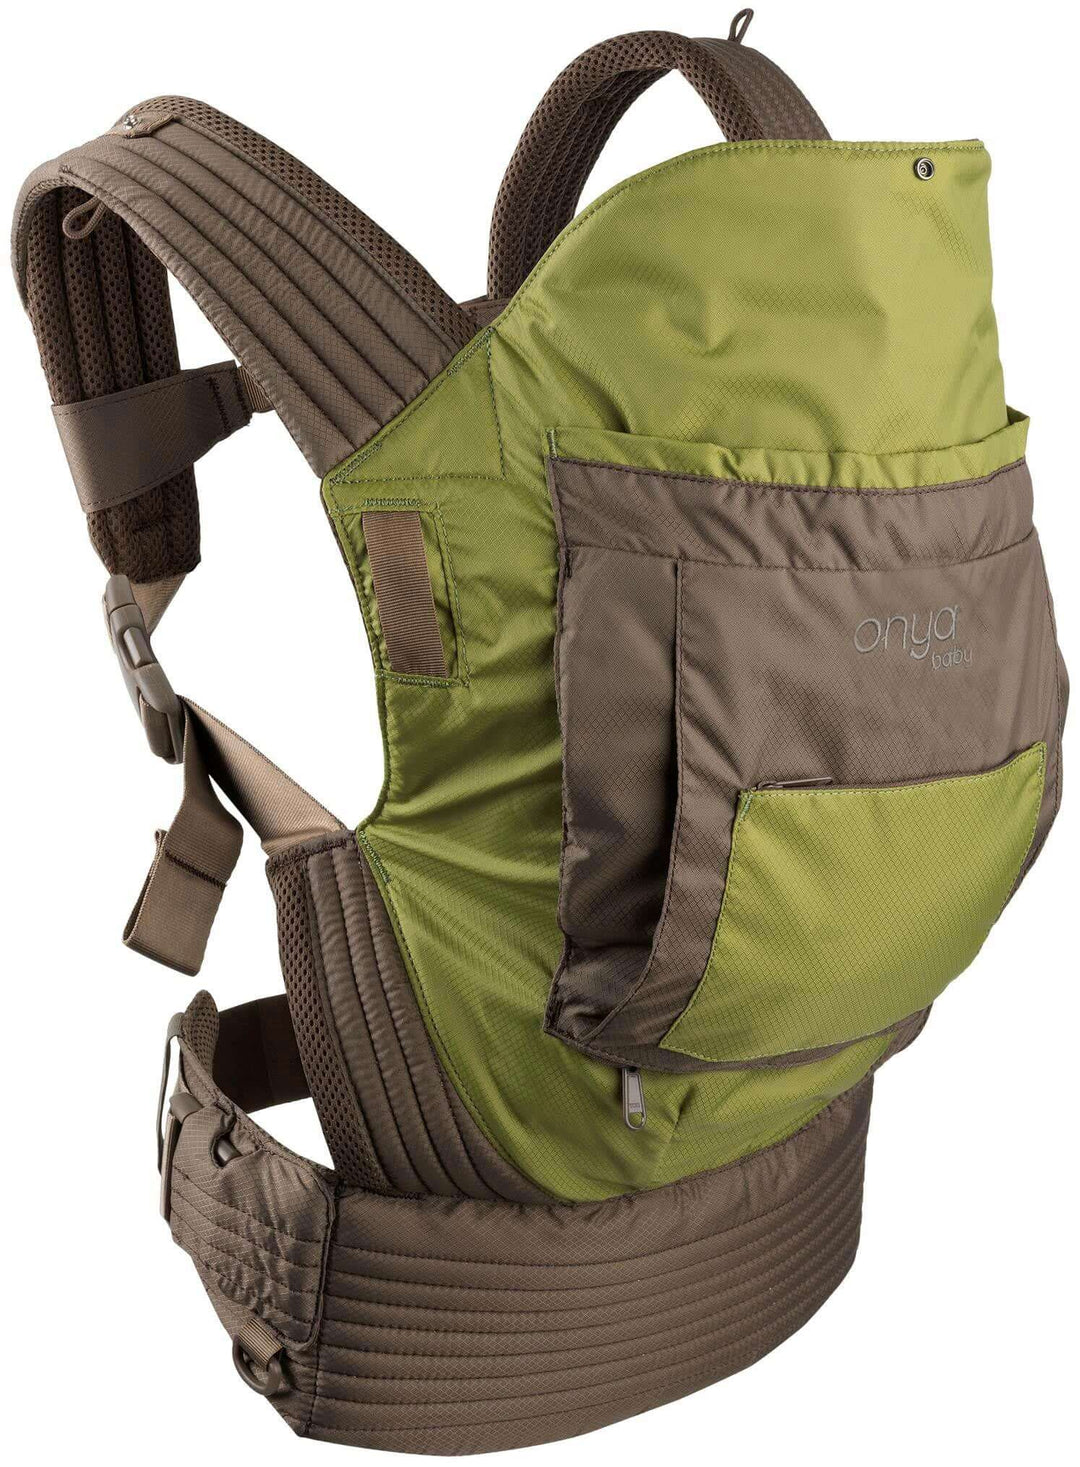 Side View of Green Colored Outback Baby Carrier by Onya Baby